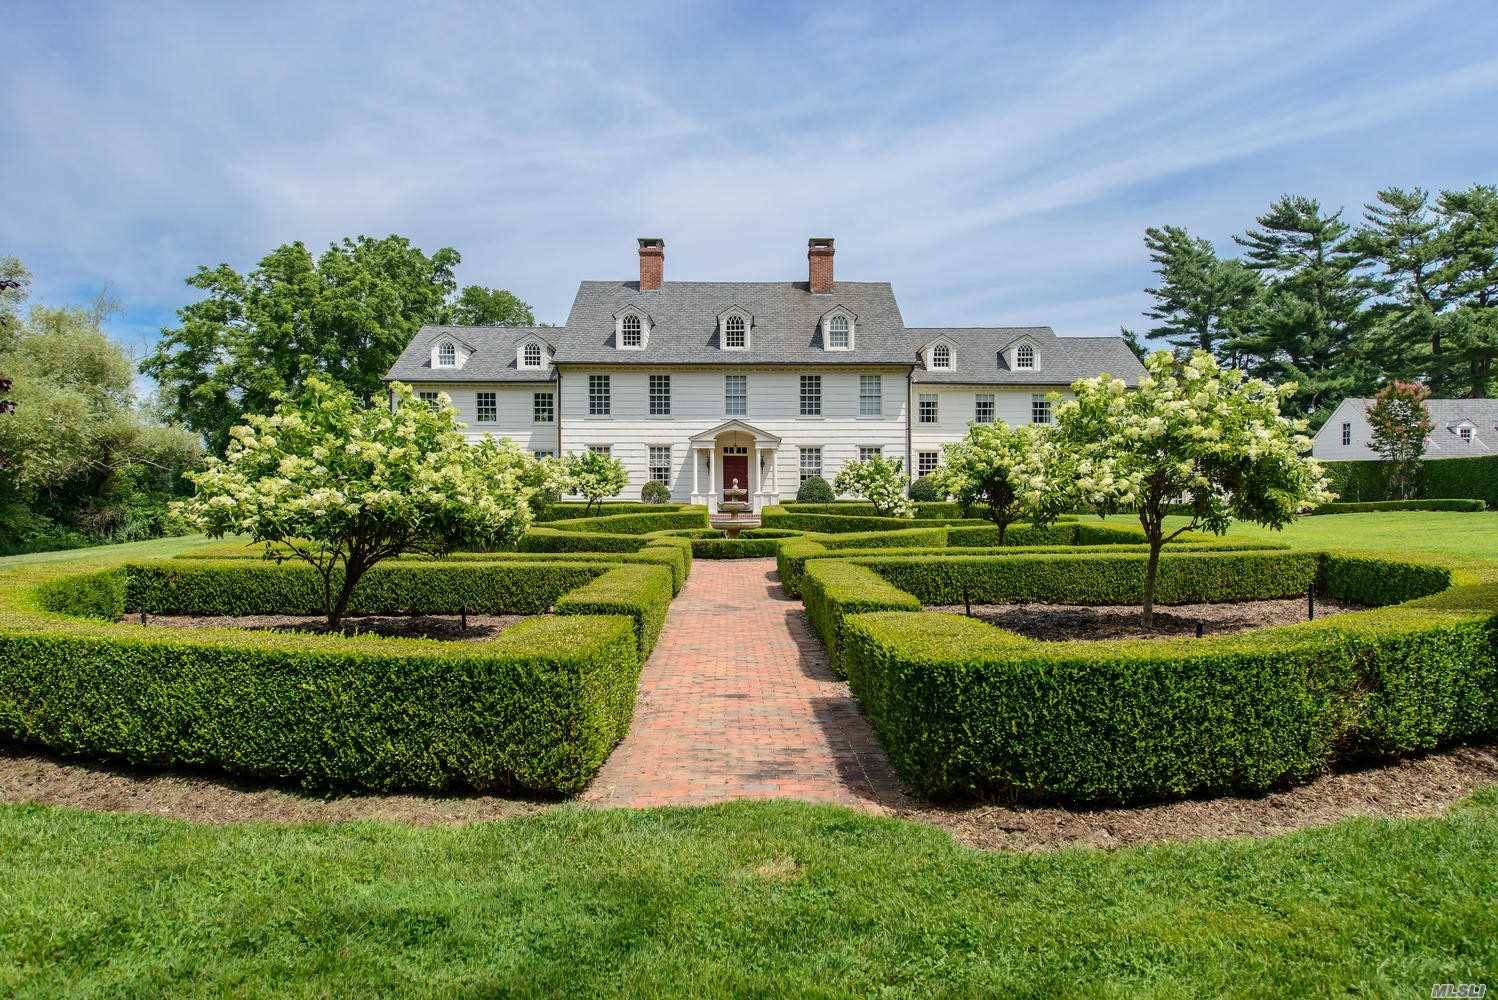 Patriot Farm. Classic 9 Bedroom Pre Revolutionary War Restored Georgian Colonial Beautifully Situated On 9.